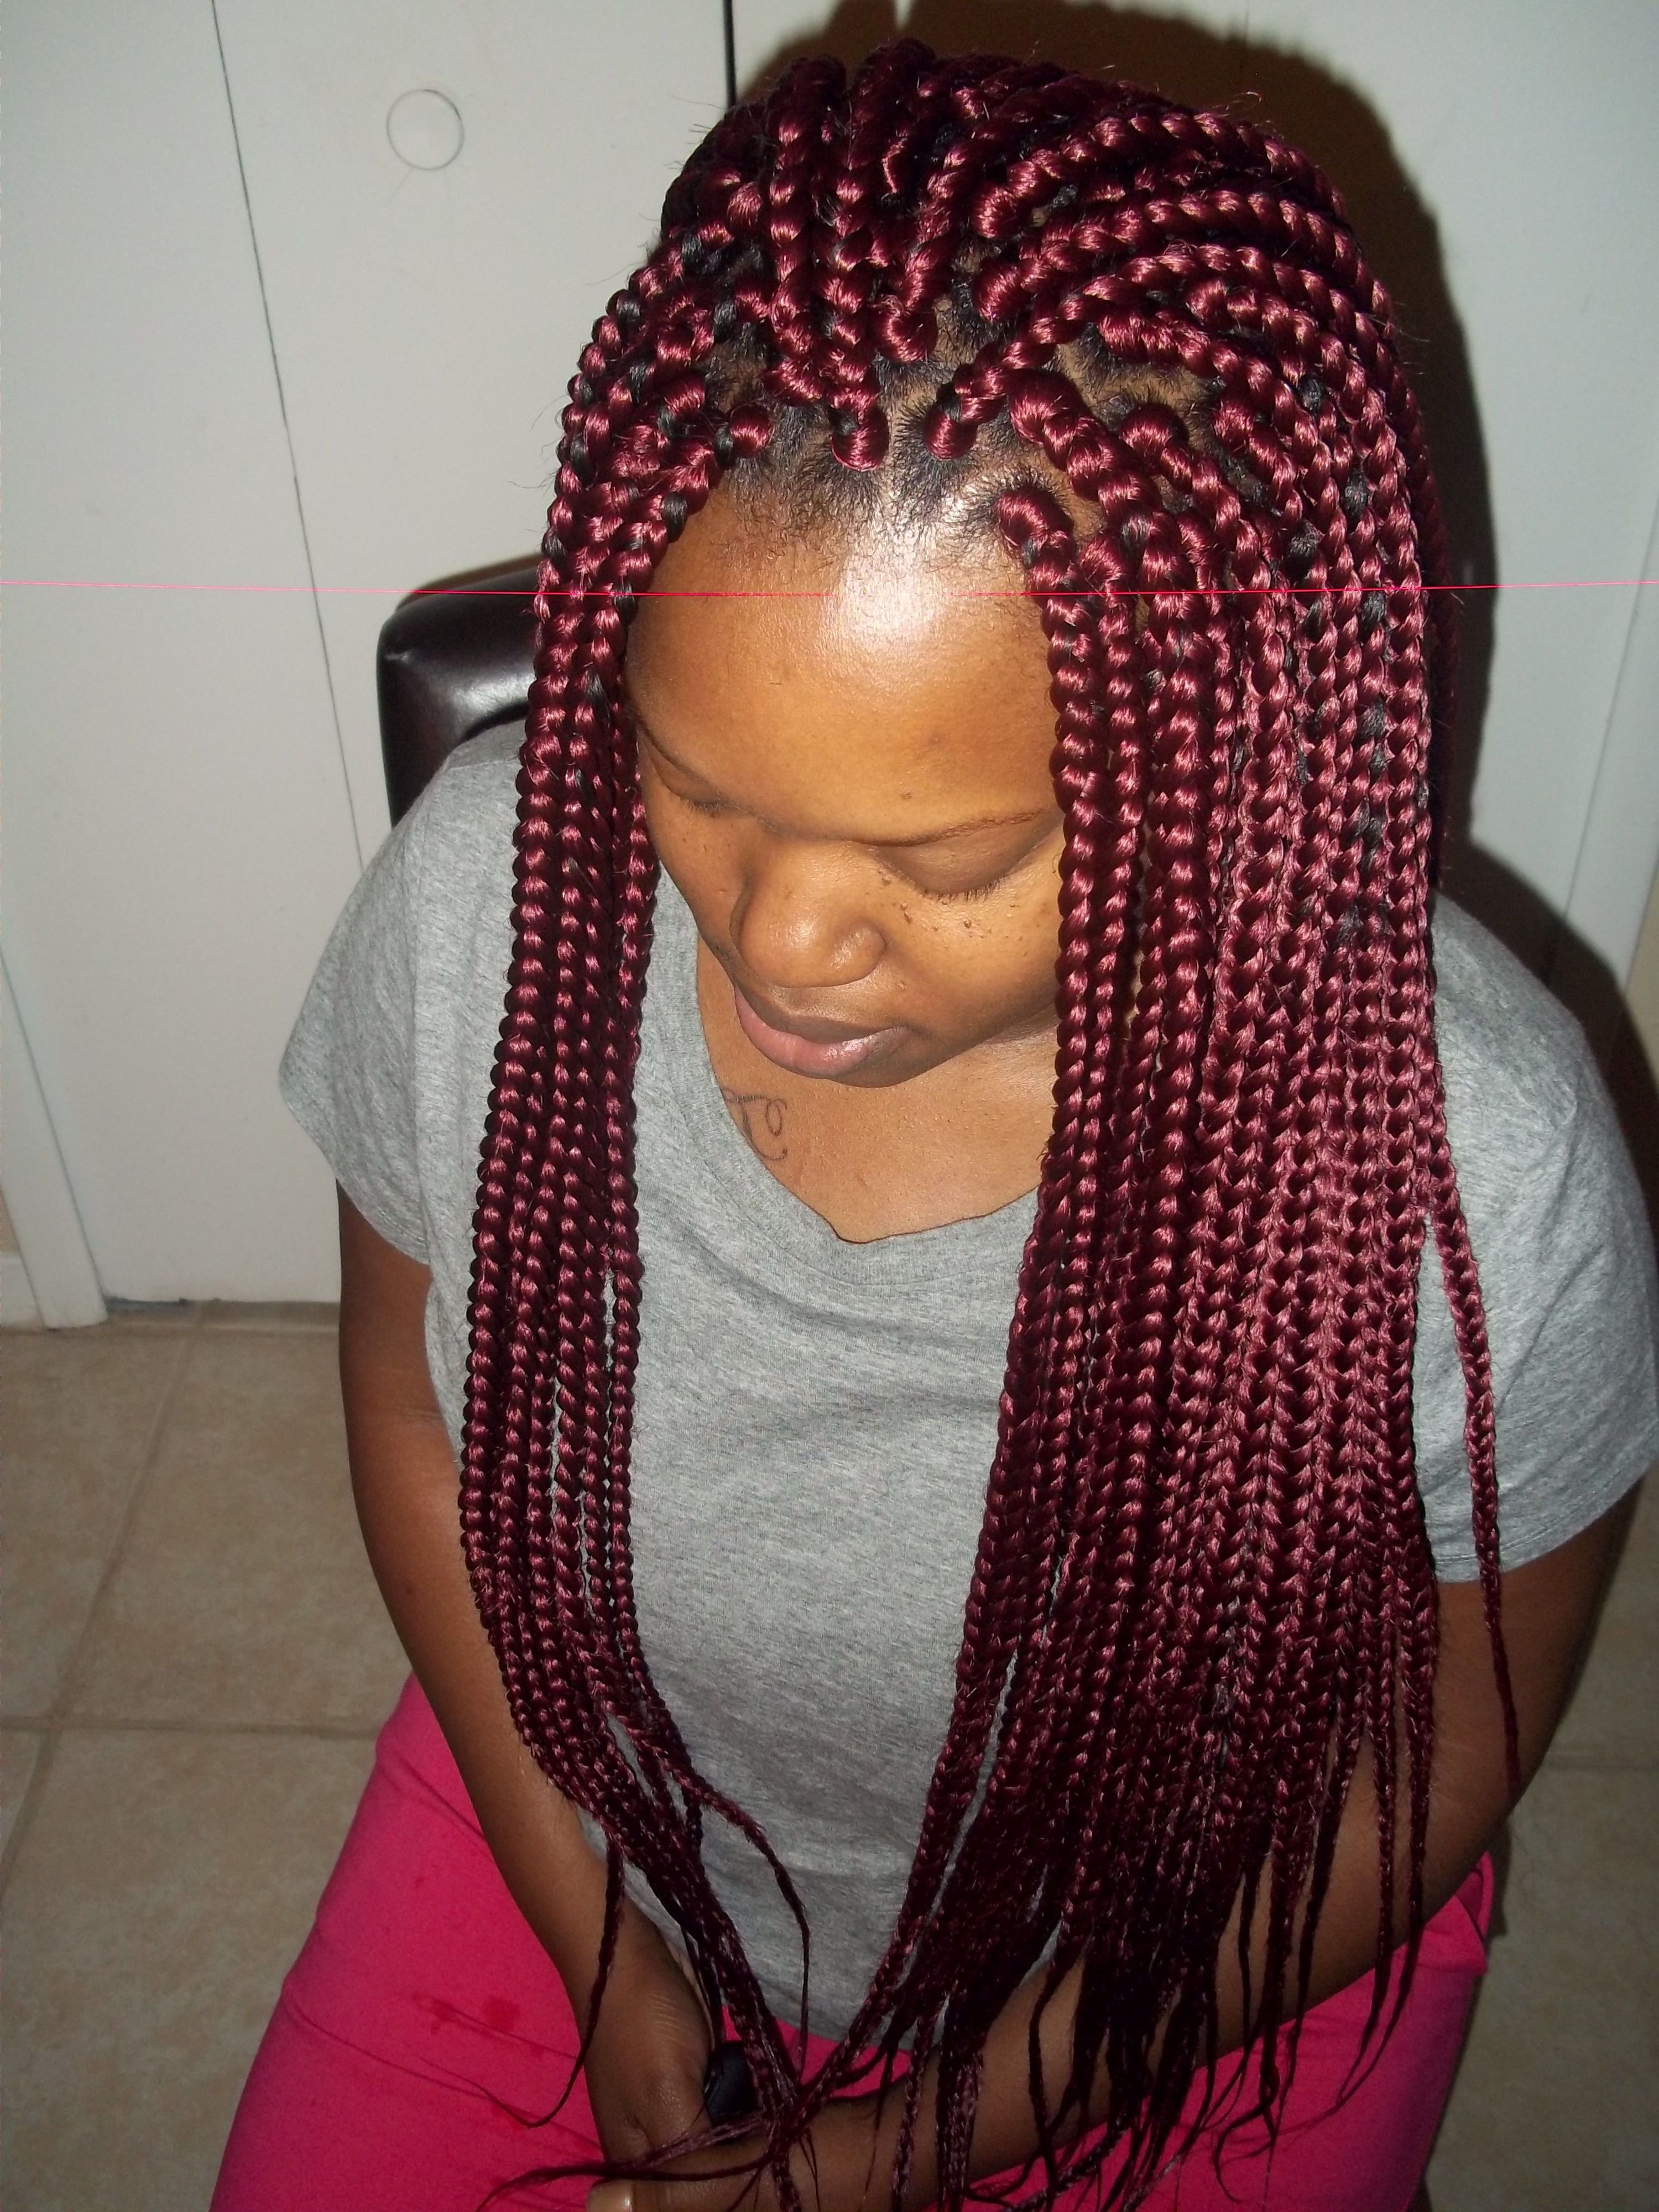 Pin On Braids, Locs & Twists Within Most Current Layered Micro Box Braid Hairstyles (View 5 of 20)